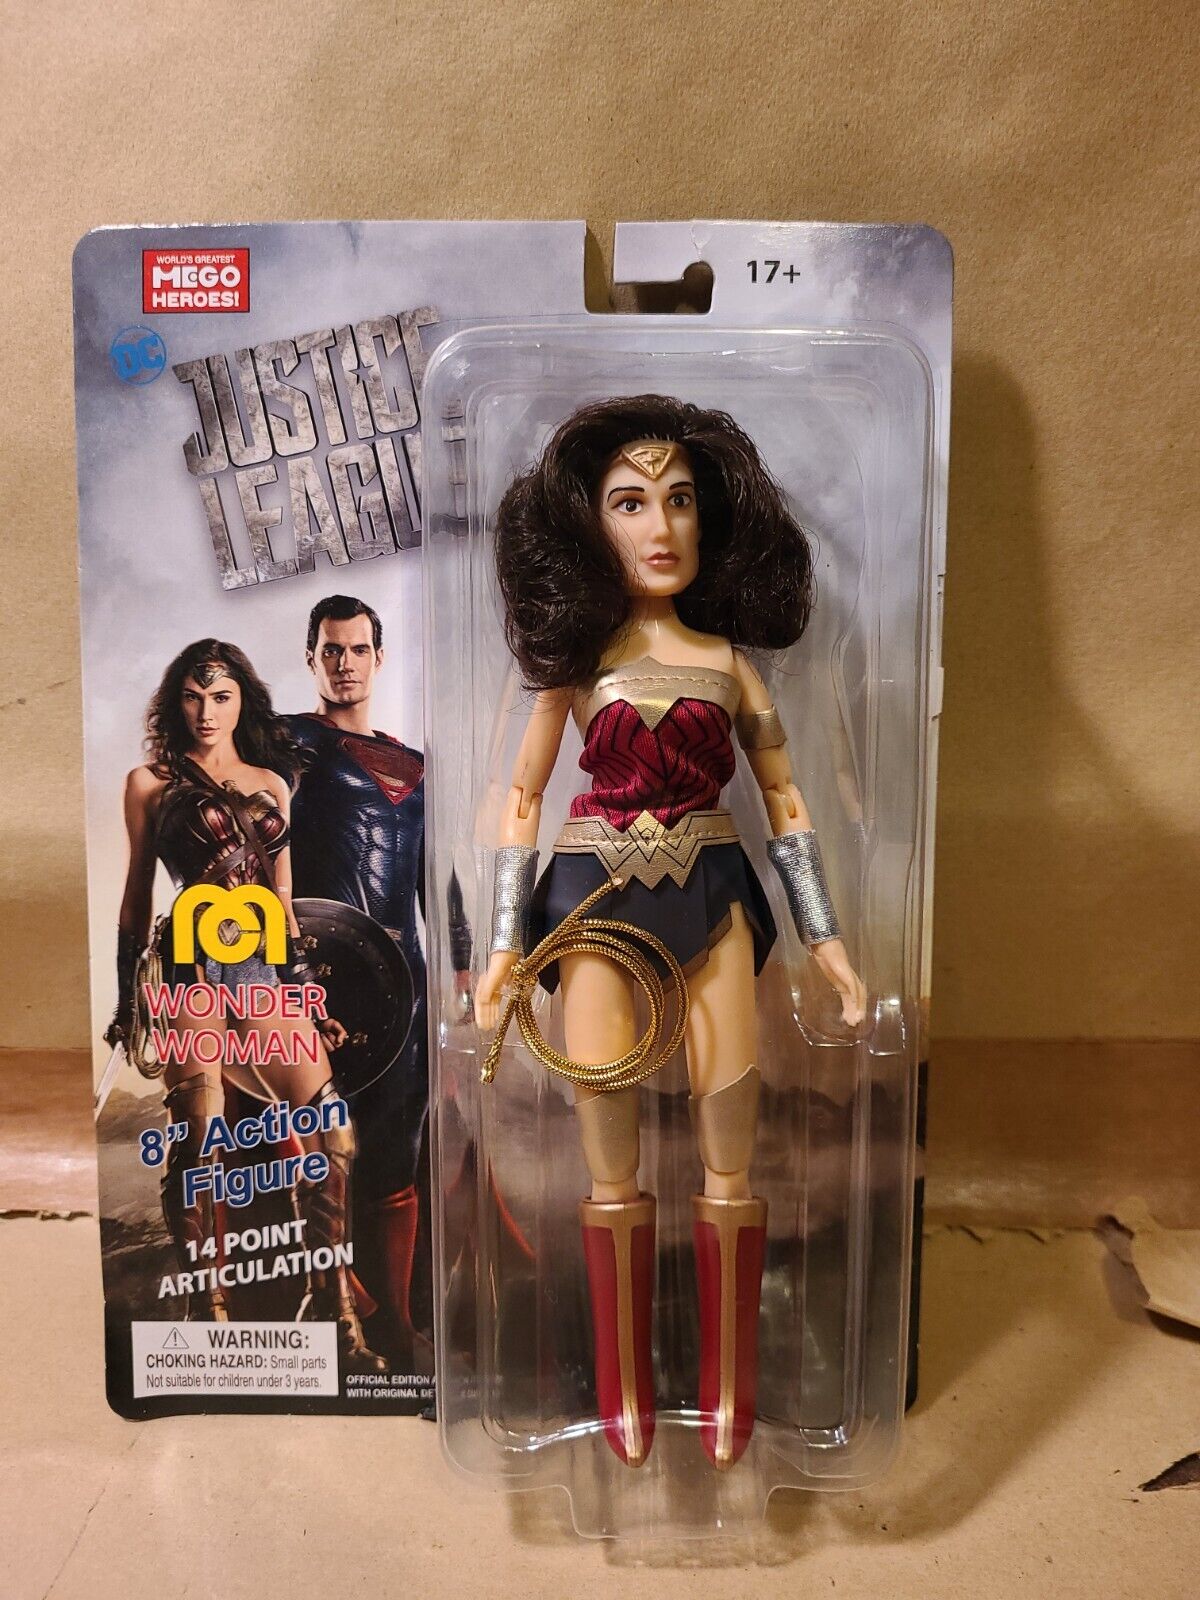 DC JUSTICE LEAGUE WONDER WOMAN MEGO Heros. 8 inch figure. New Sealed. Retro